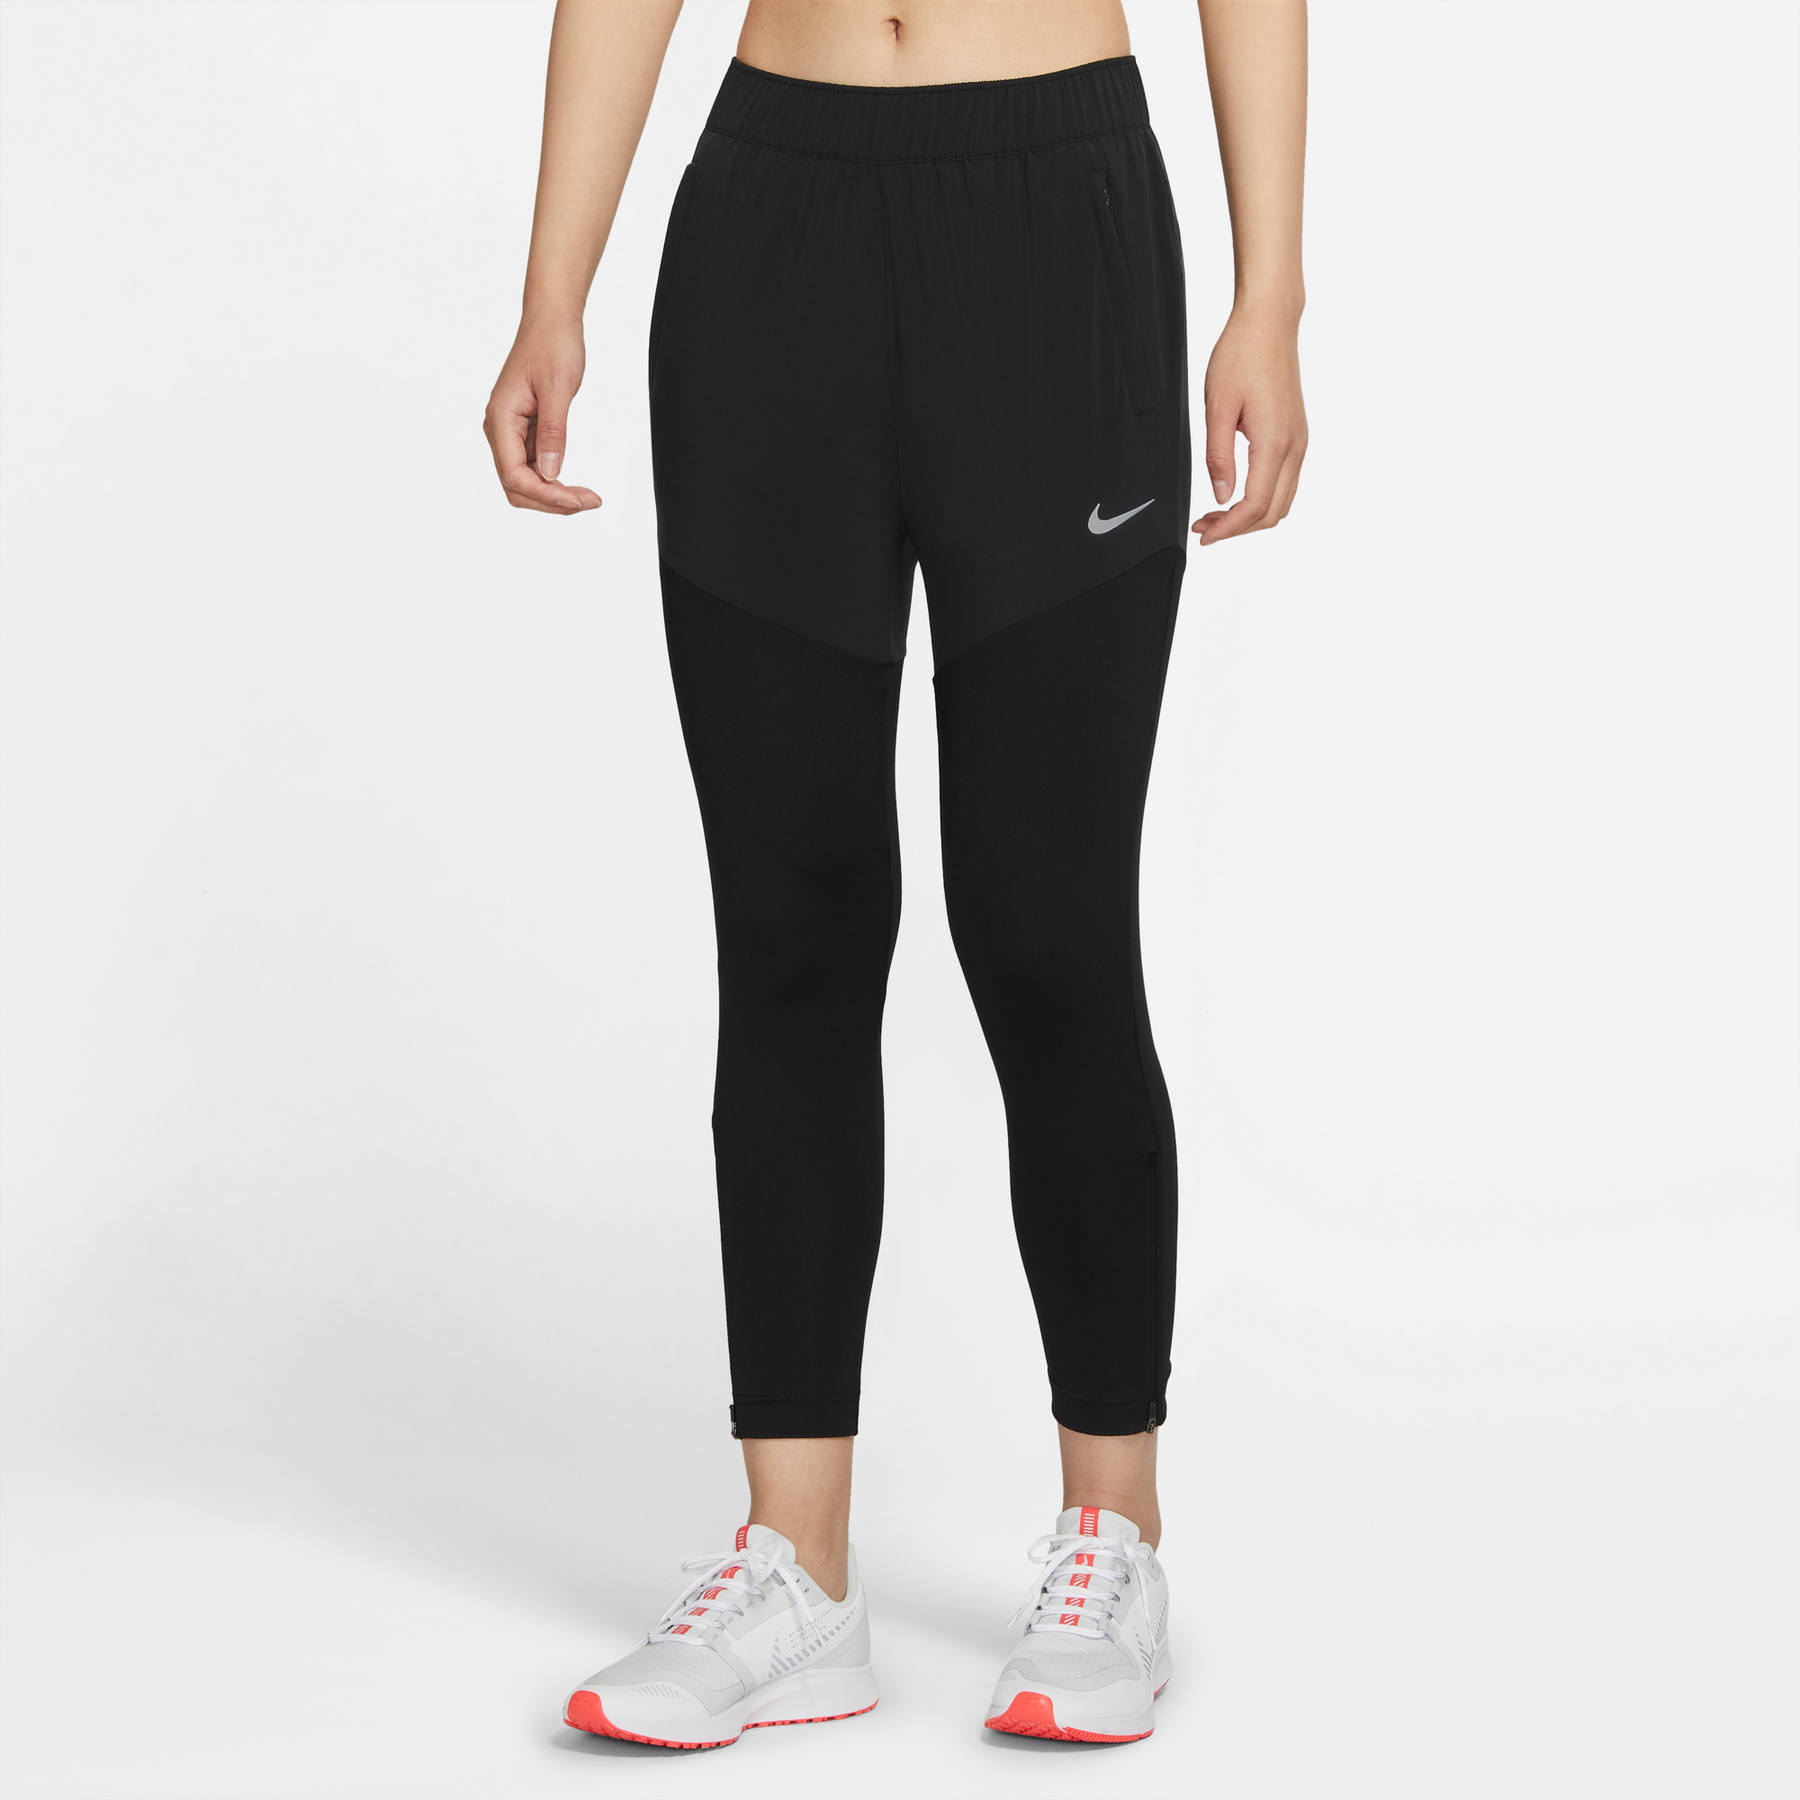 Nike-Women's Nike Dri-FIT Essential Tight-Black/Reflective Silver-Pacers Running